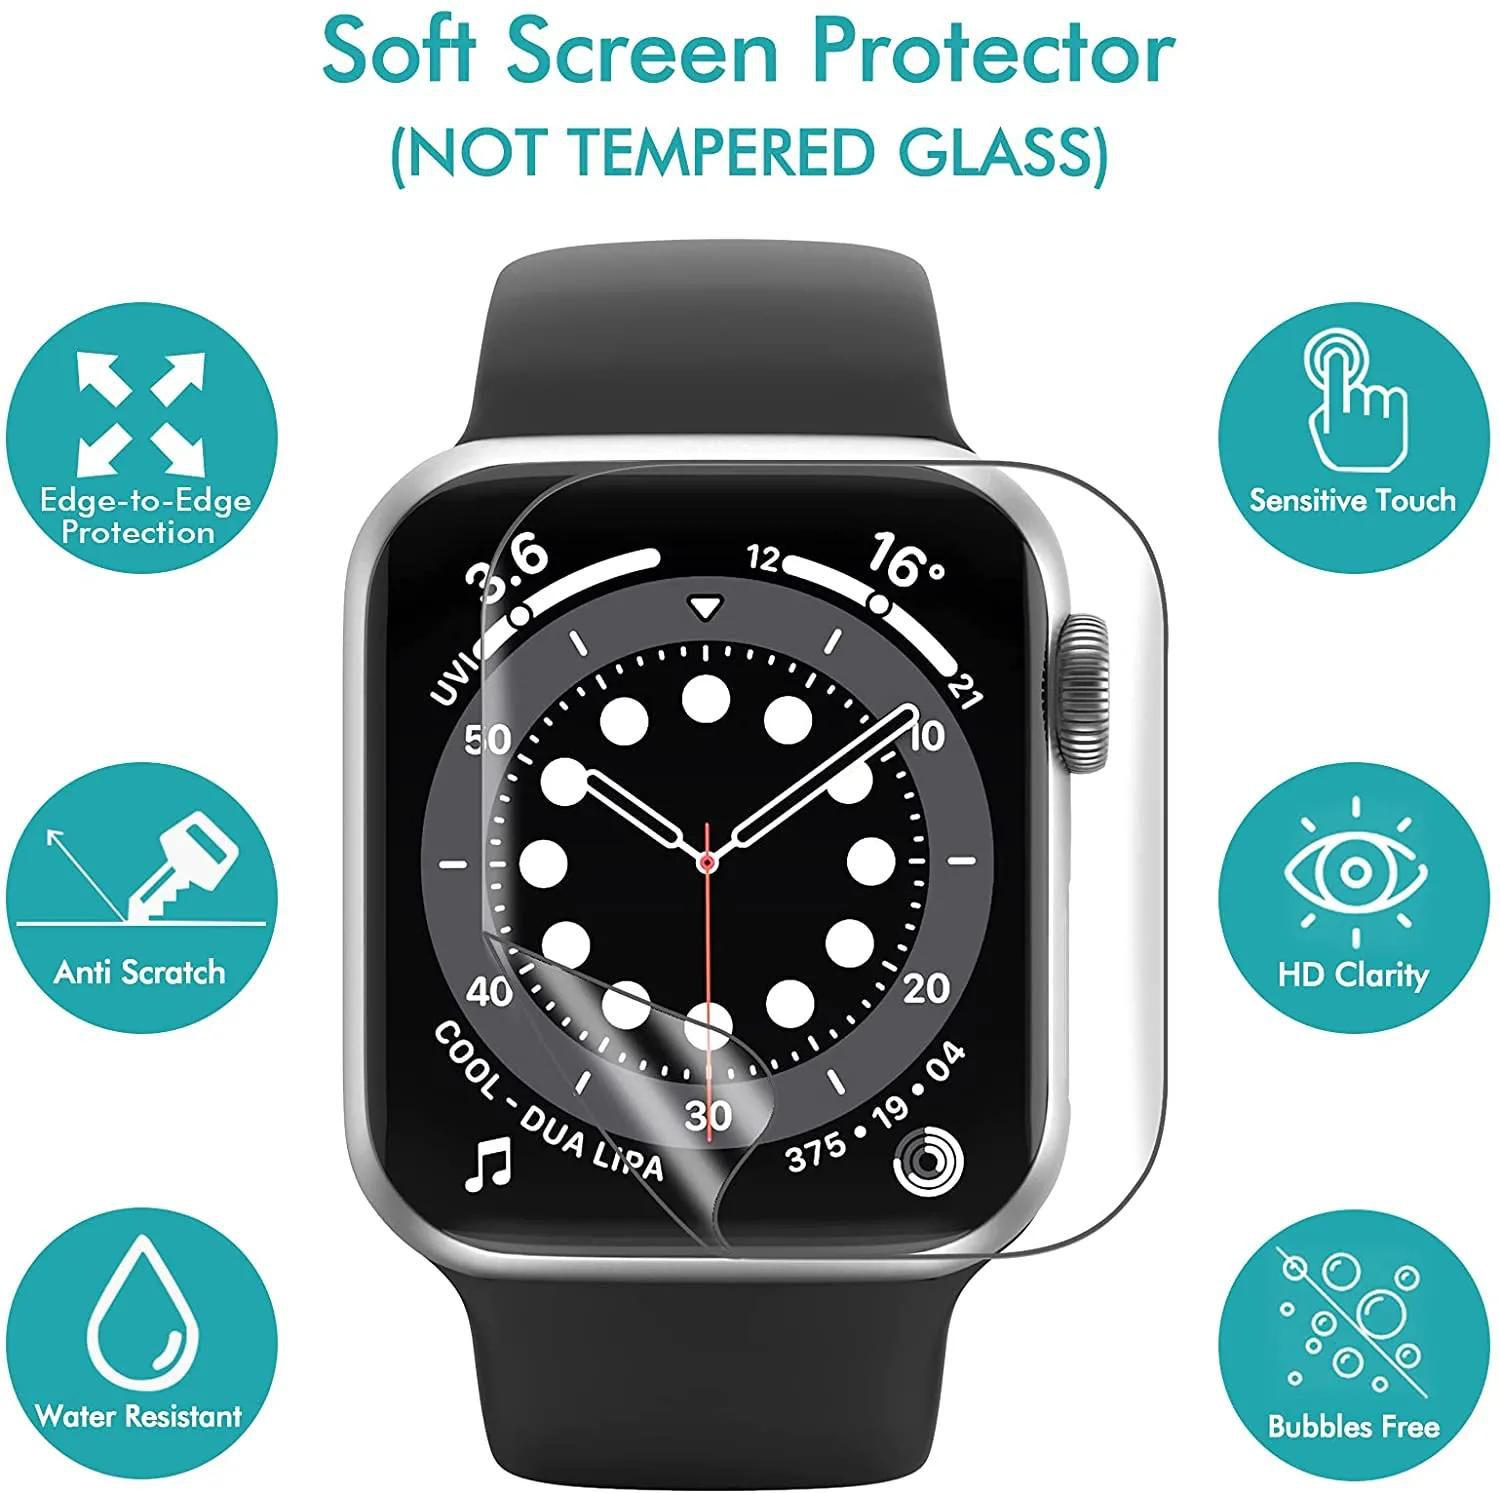 Screen Protector Film For Apple Watch iWatch For Series 7, 6, 5, 4, 3, 2 Protective Films Clear Transparent Full Cover [Self Healing] [ Anti-Bubble] TPU HD Clear Film